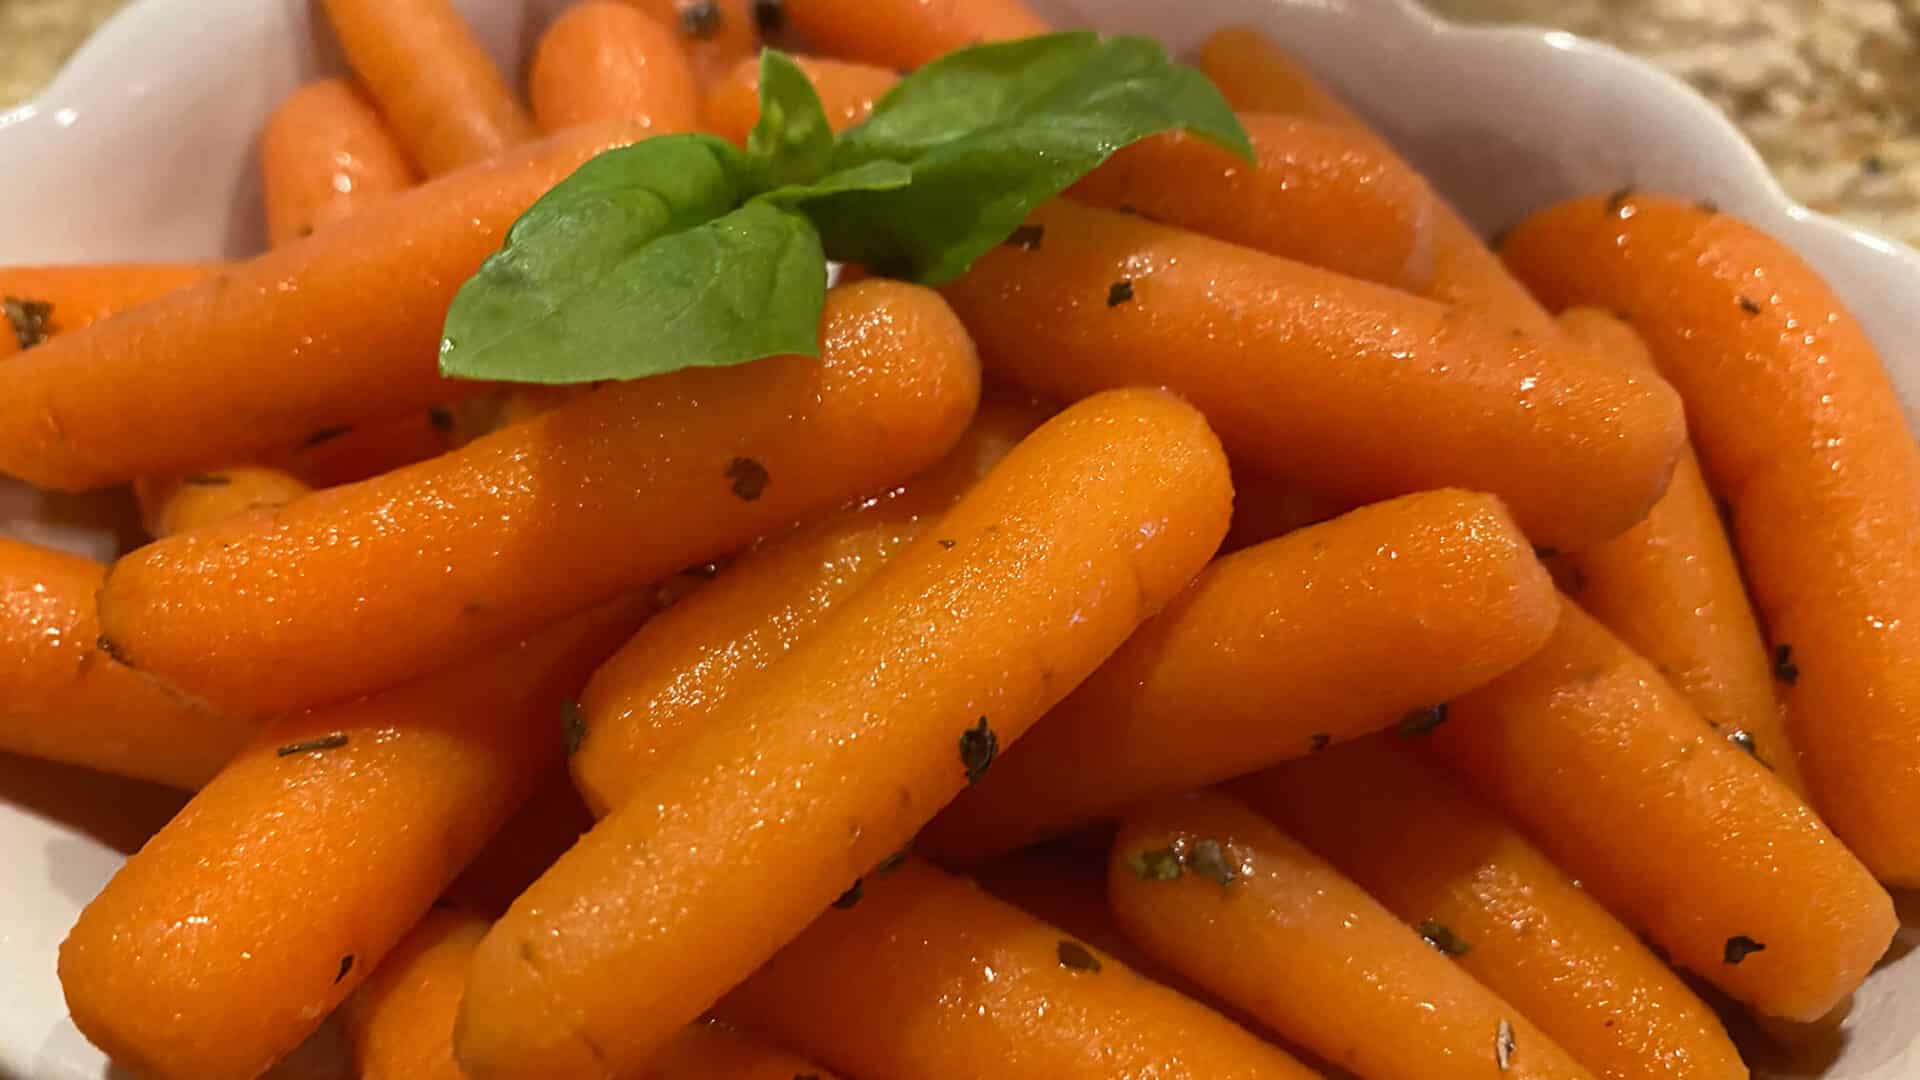 orange baby carrots with sprig of basil